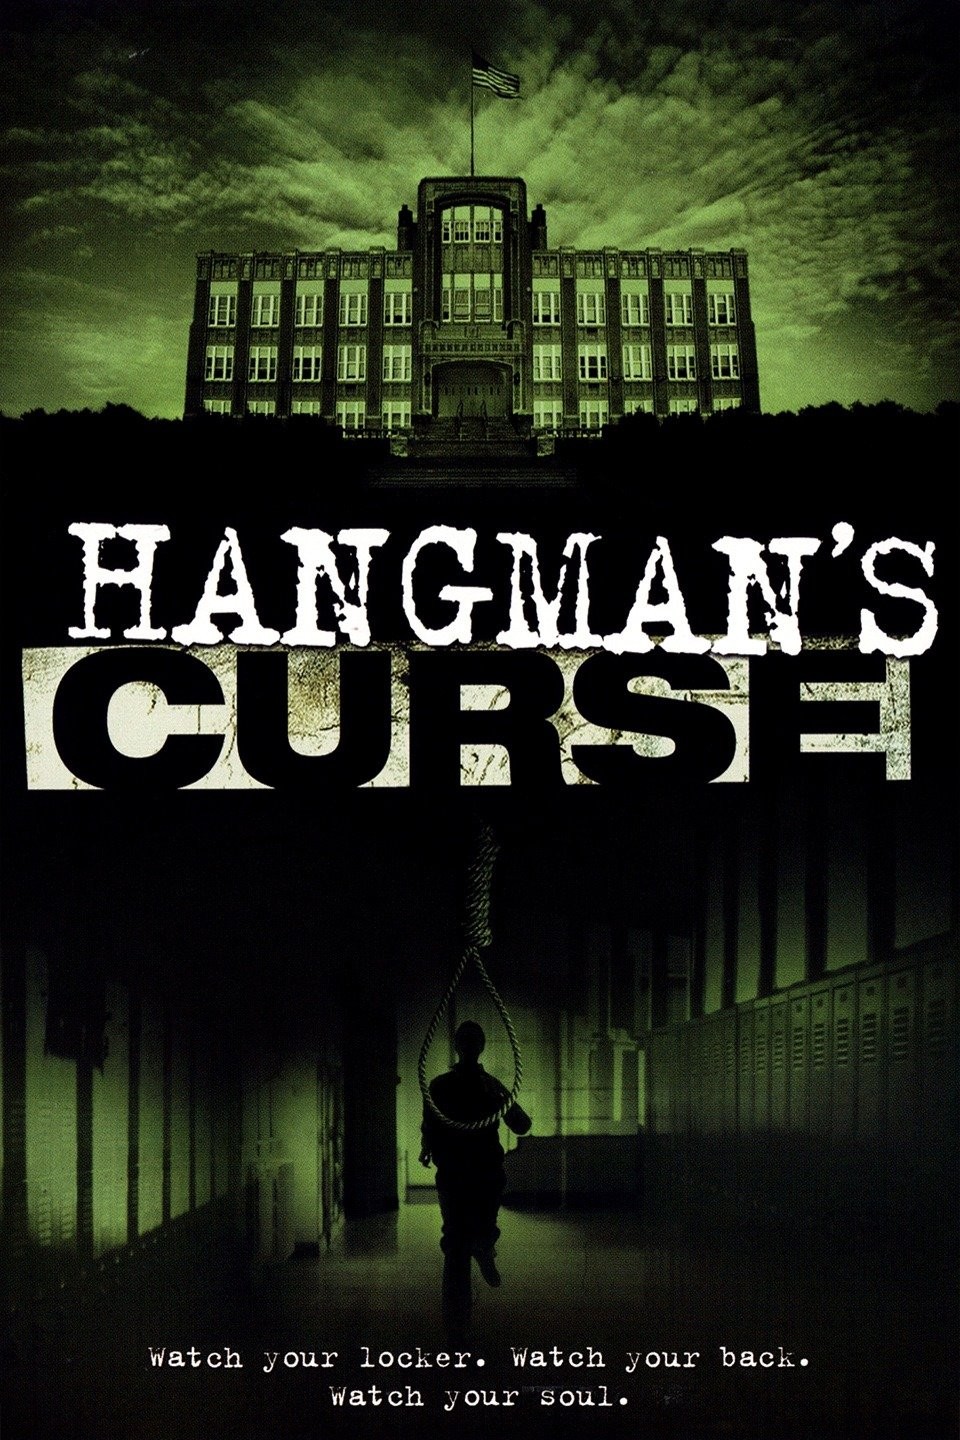 The Hangman Movie: Showtimes, Review, Songs, Trailer, Posters